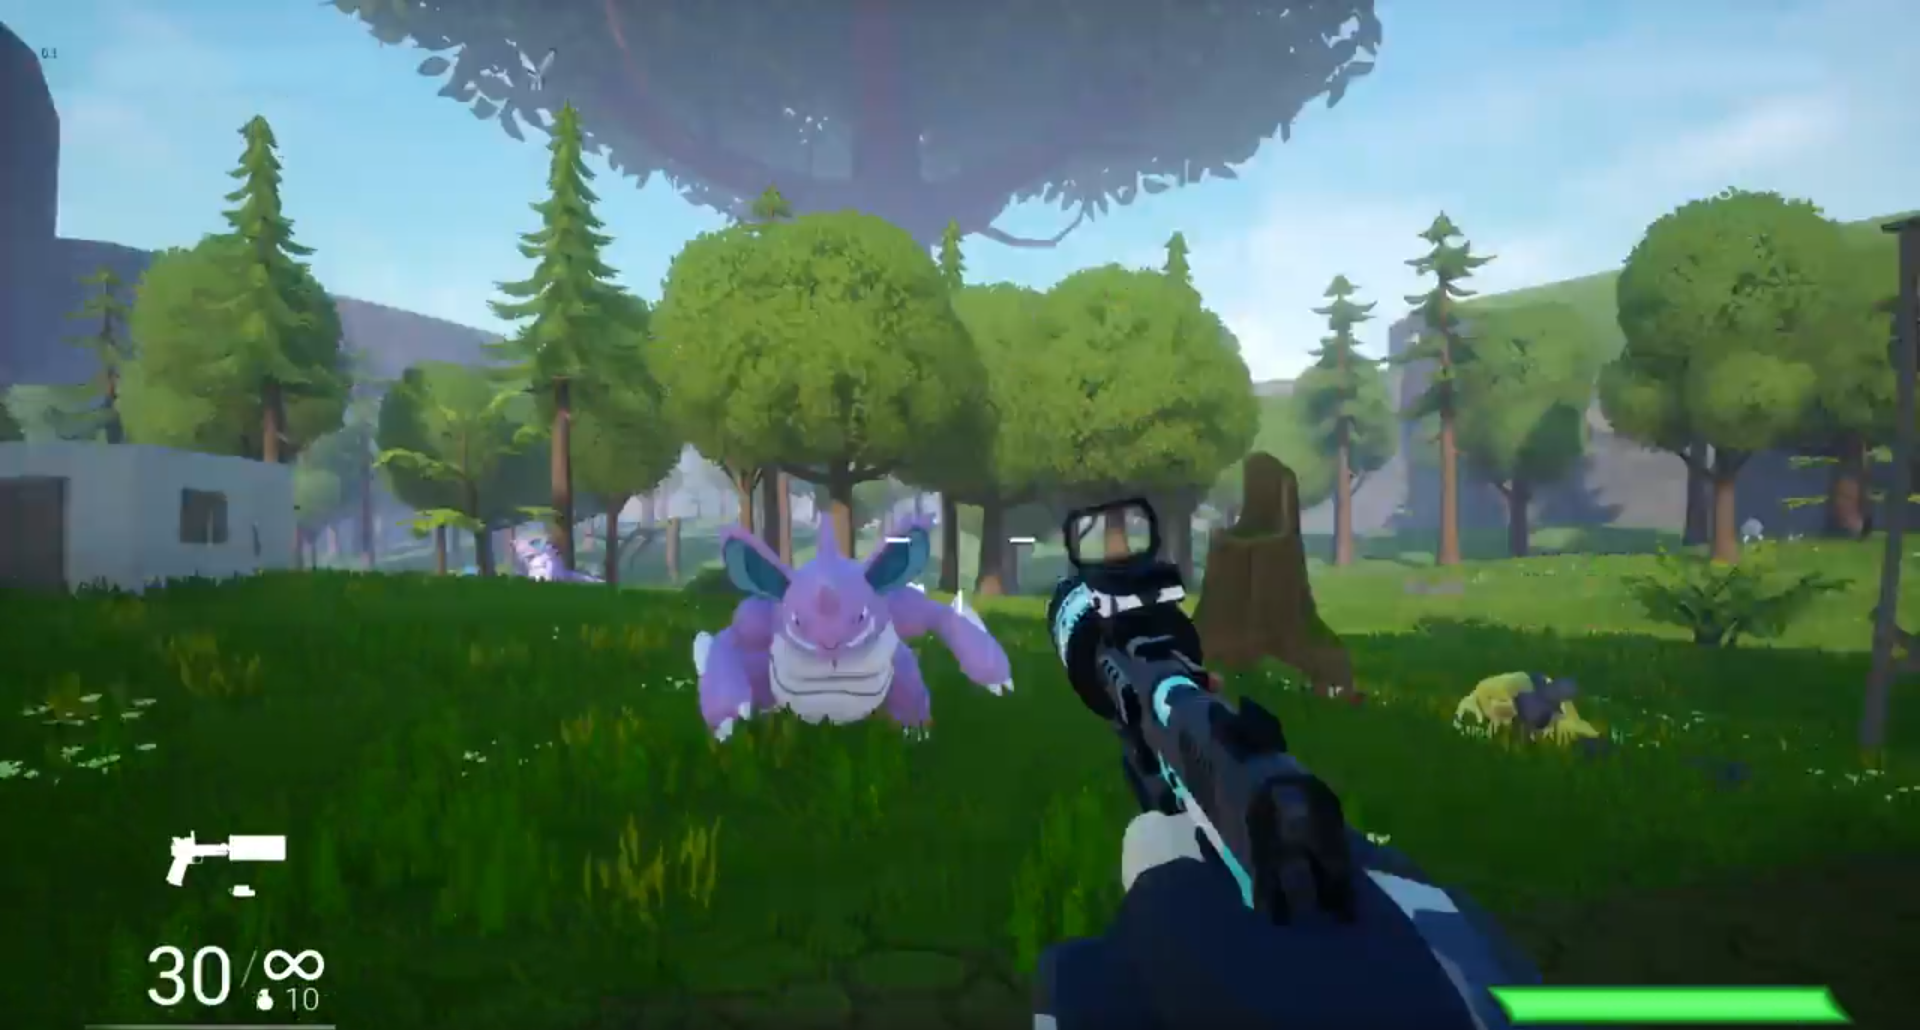 Nintendo Lawyers Scrub Fan Made Pokemon Fps Game From The Internet